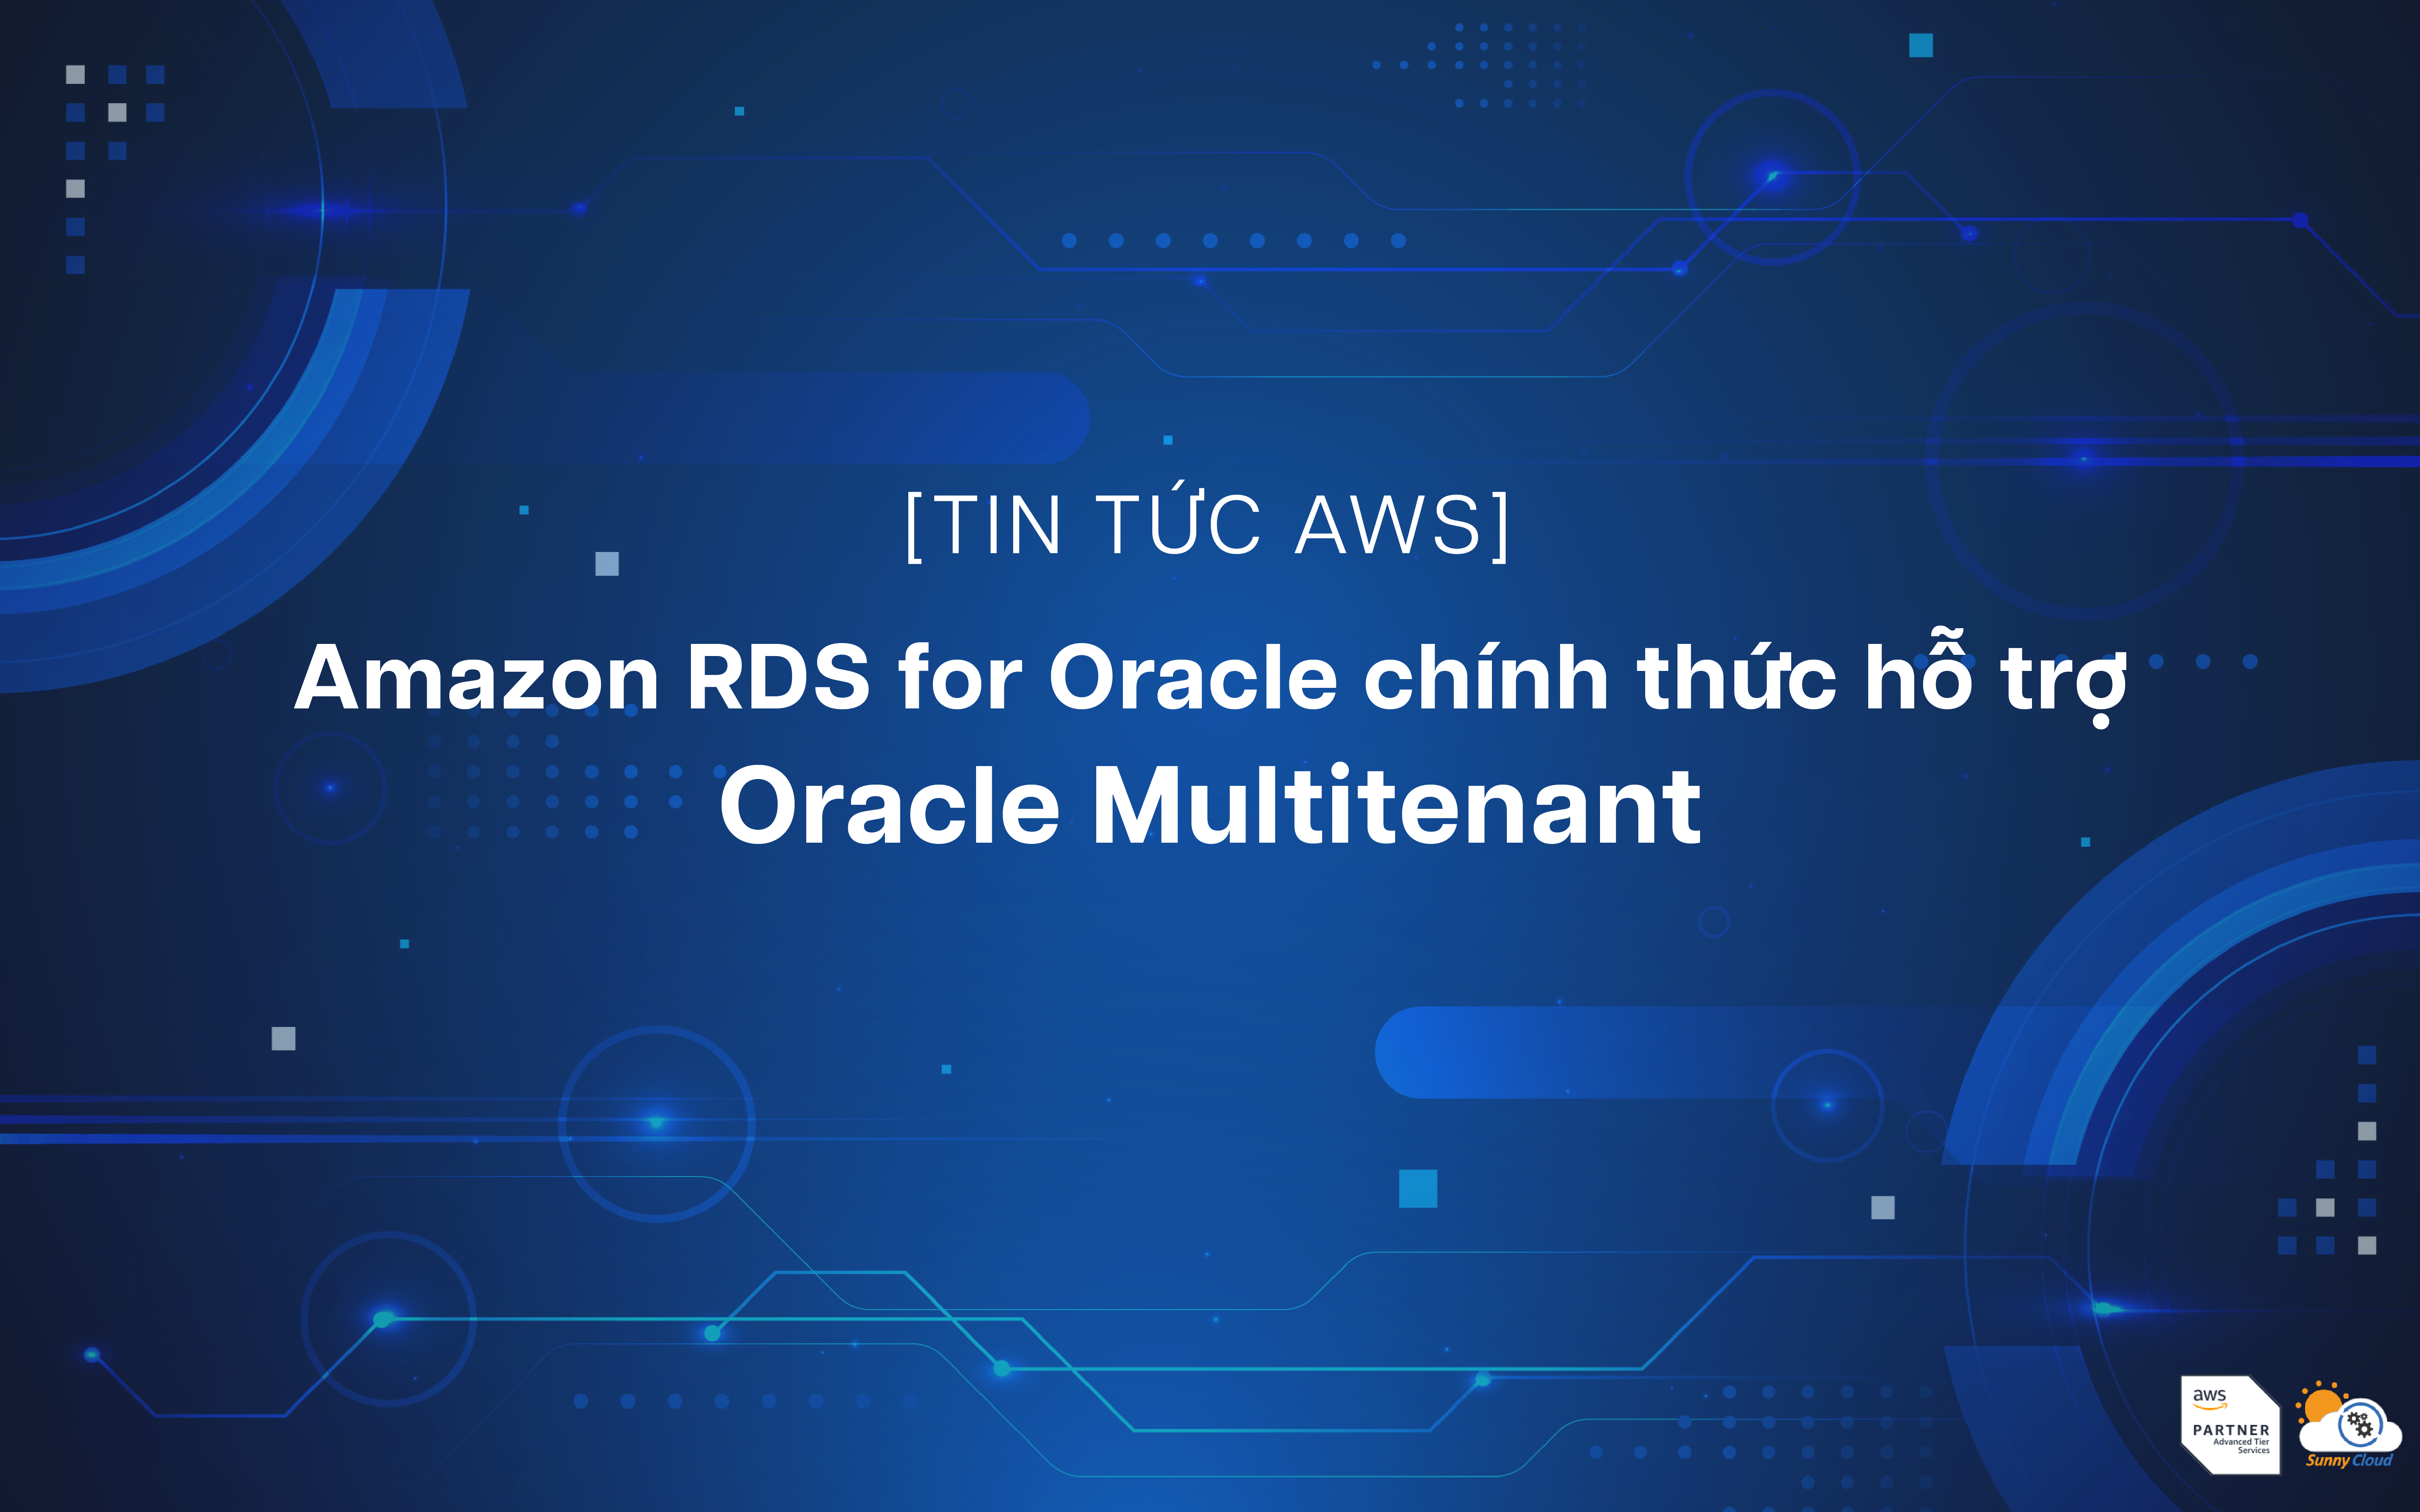 Amazon RDS for Oracle chính thức hỗ trợ Oracle Multitenant